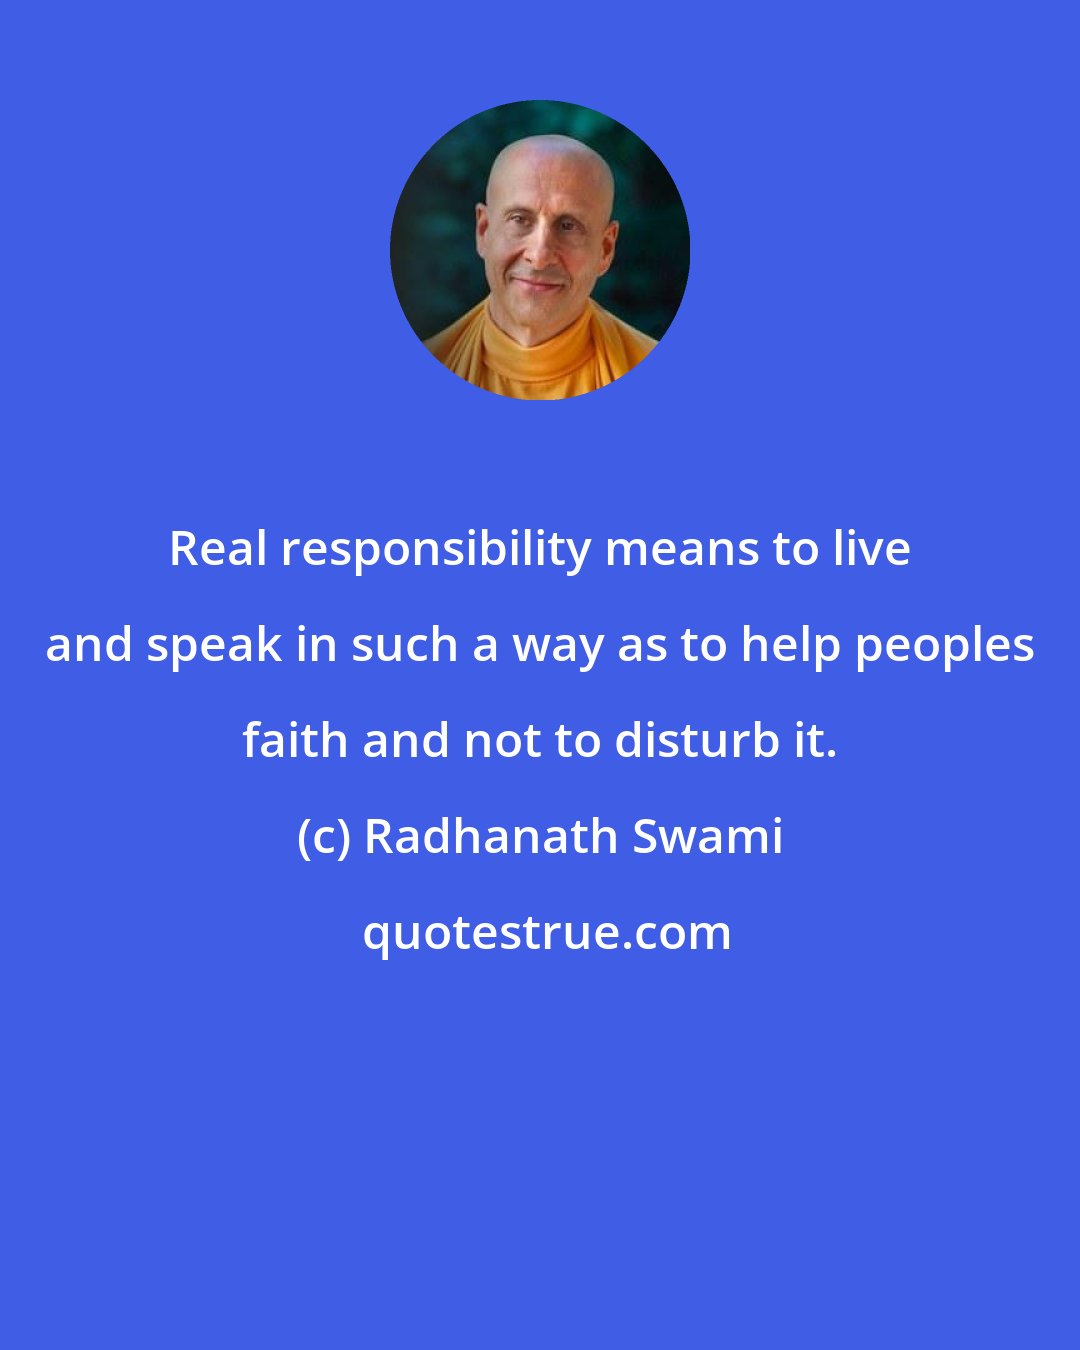 Radhanath Swami: Real responsibility means to live and speak in such a way as to help peoples faith and not to disturb it.